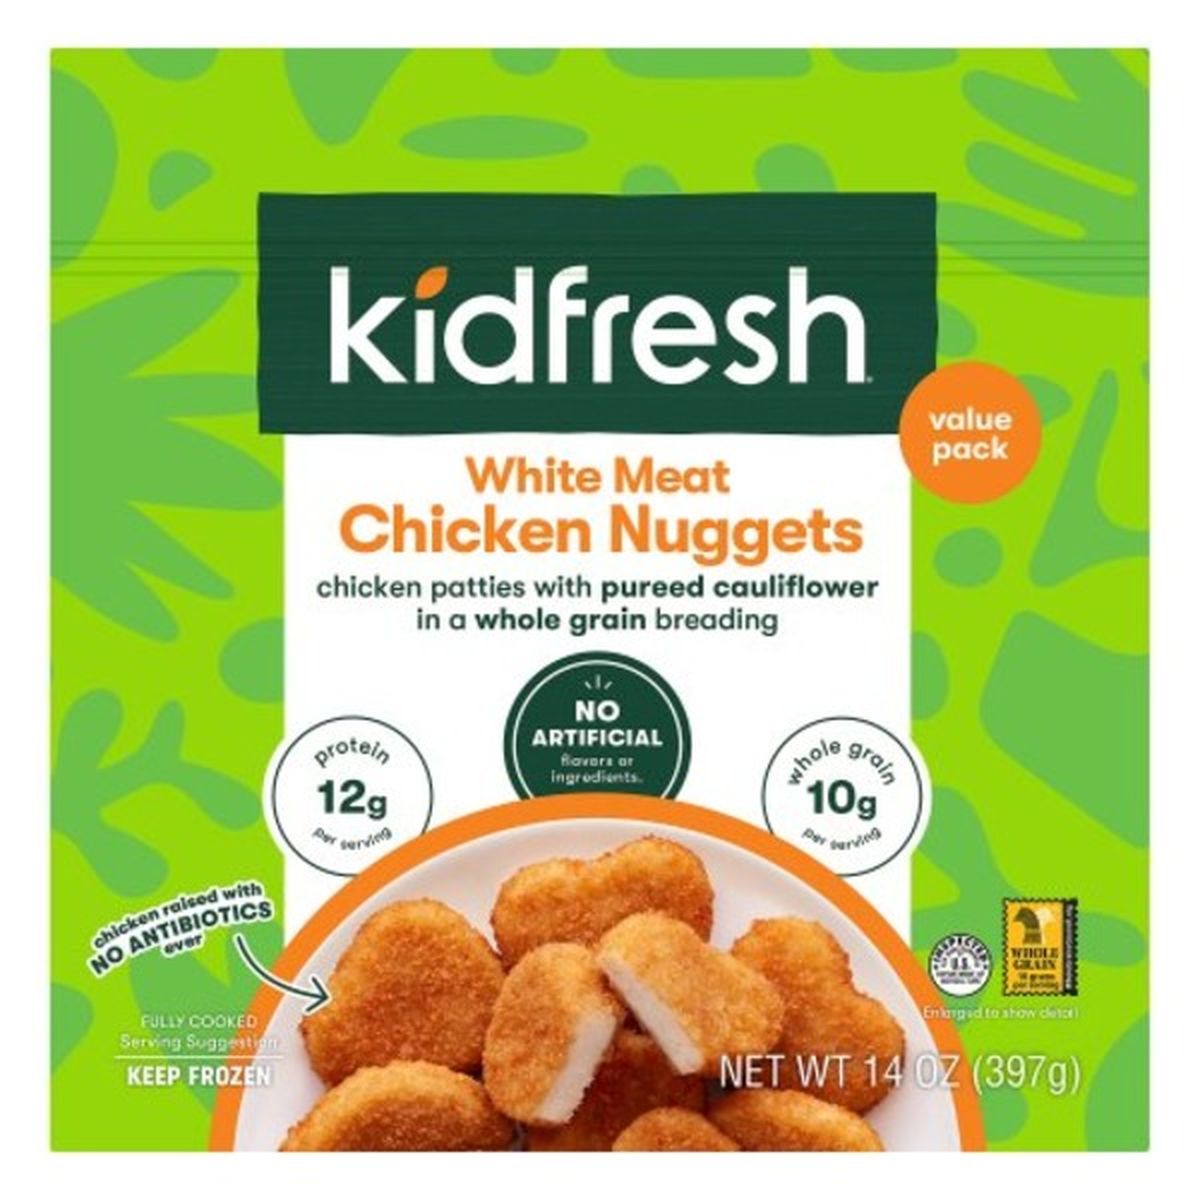 Calories in Kidfresh Chicken Nuggets, White Meat, Value Pack